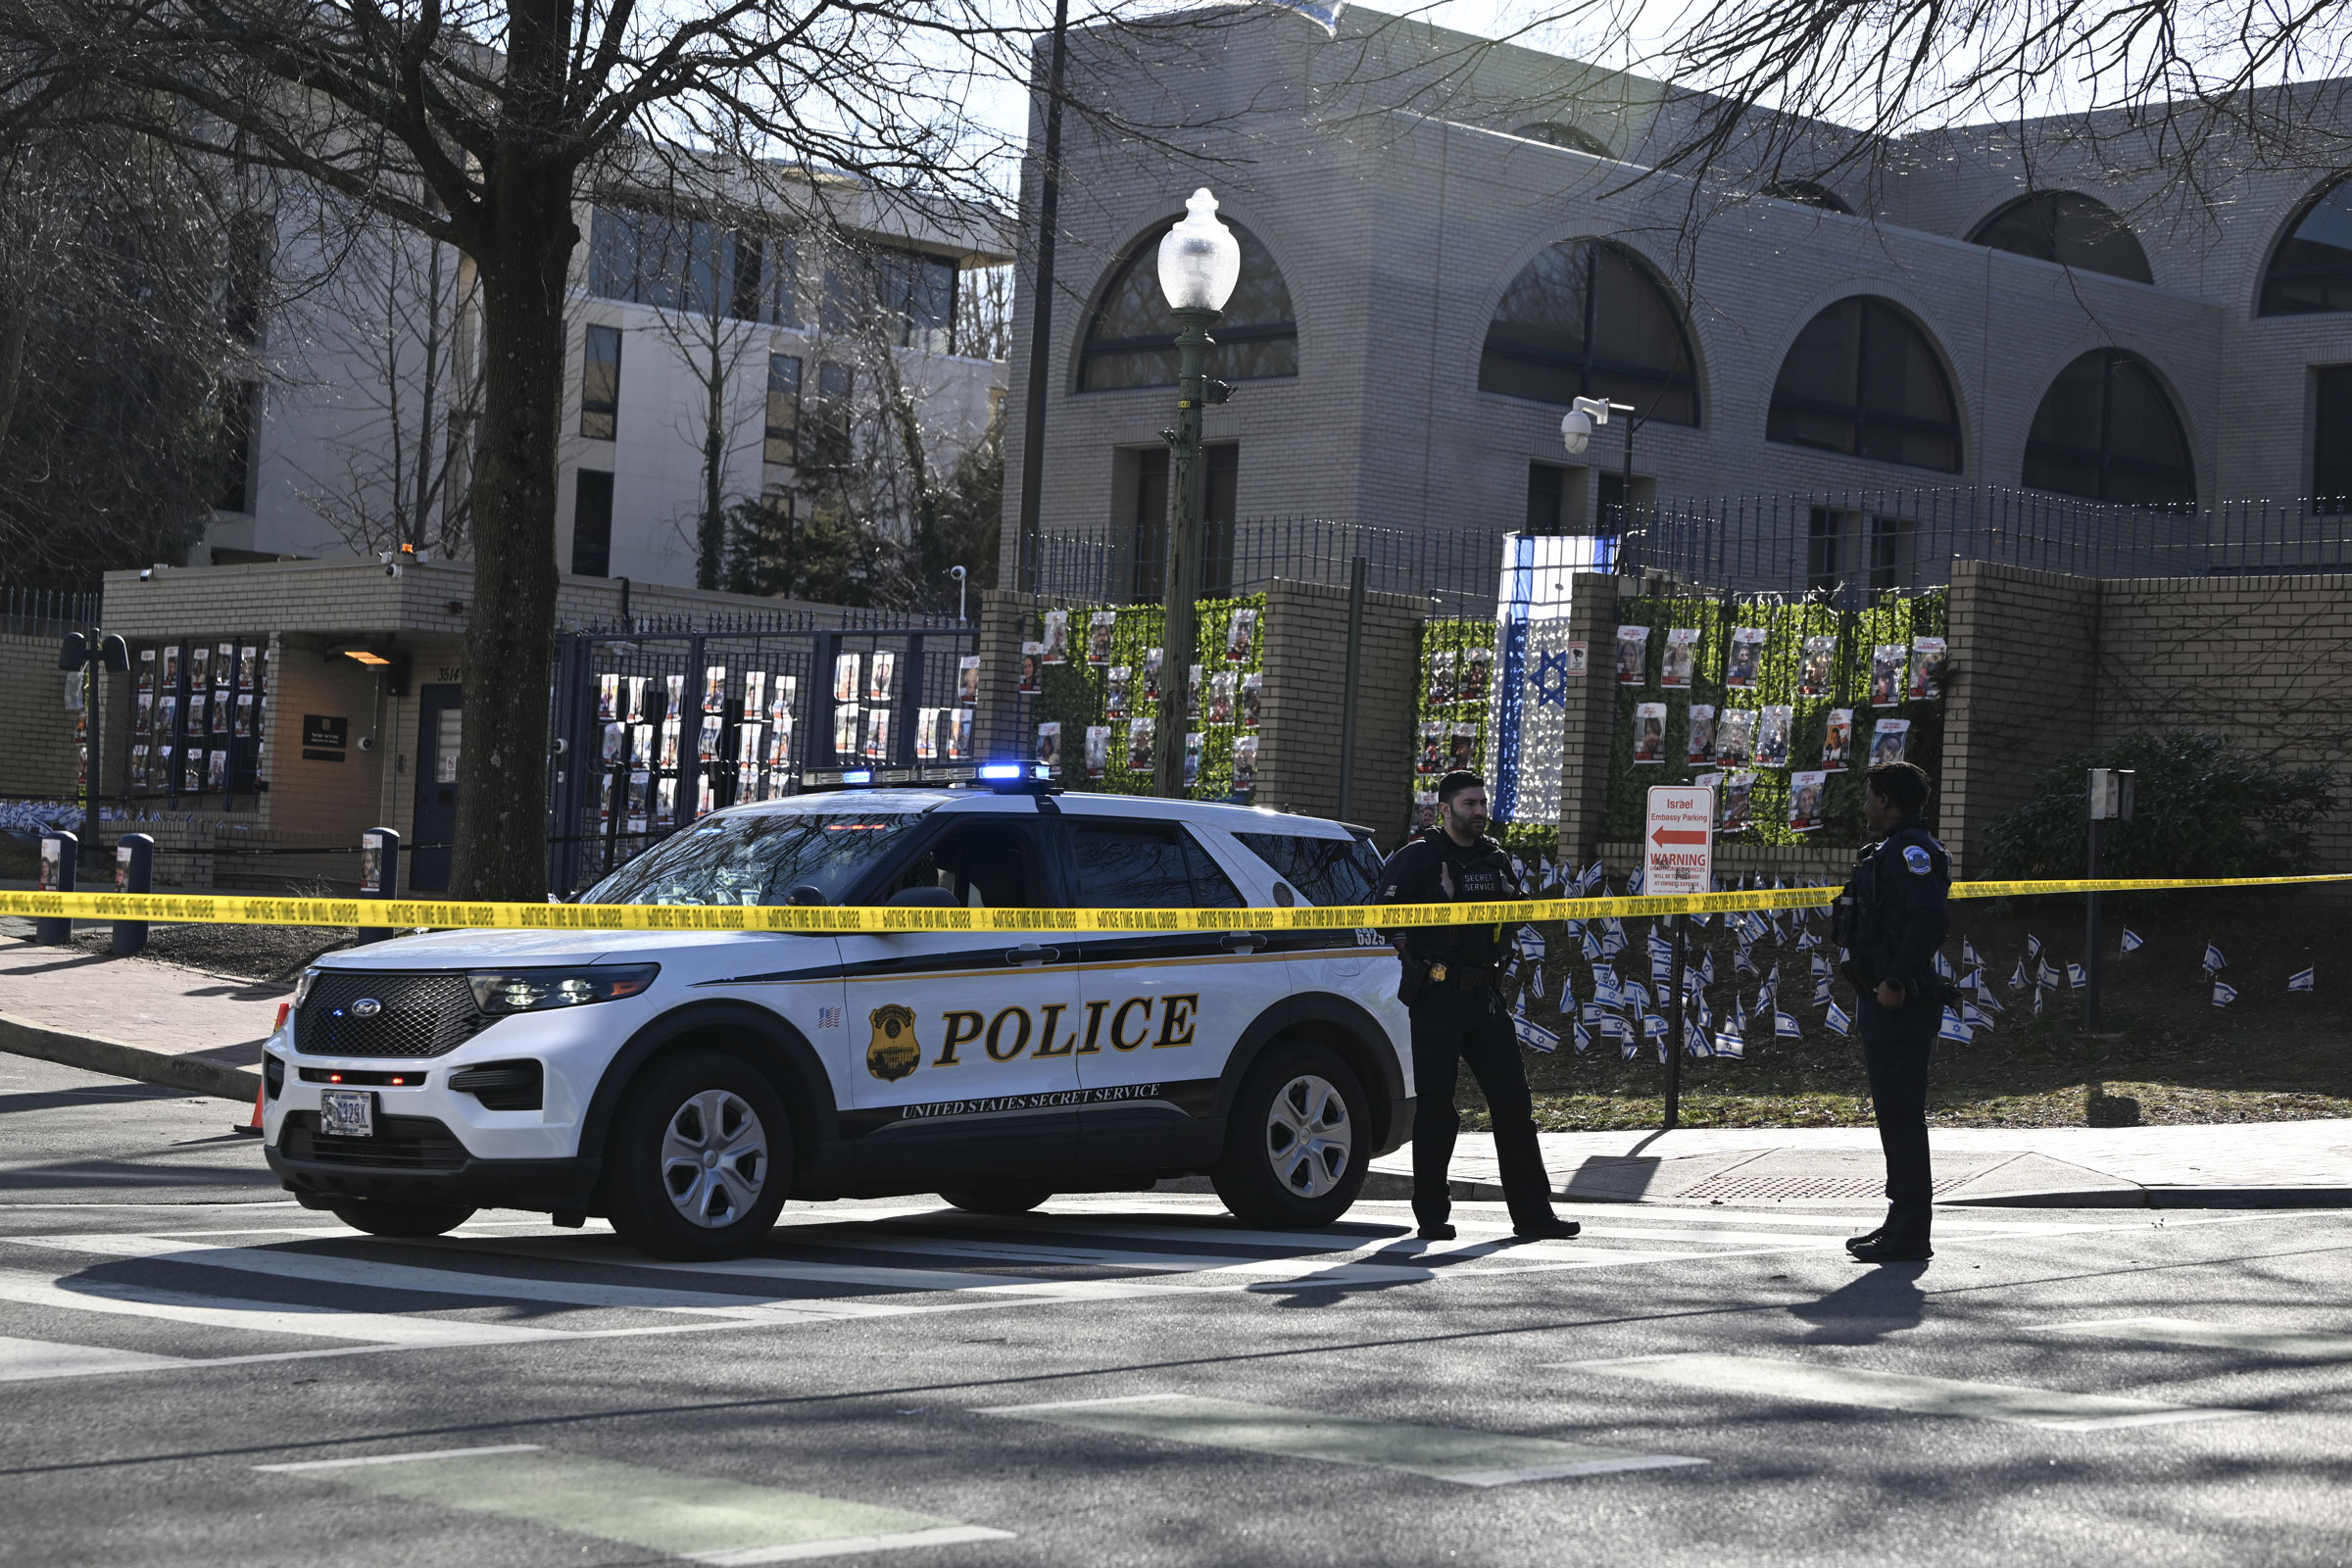 Police take security measures and investigate the crime scene after 25-year-old Aaron Bushnell, an active-duty member of the US Air Force, set himself on fire Sunday outside the Israeli Embassy in Washington, D.C.